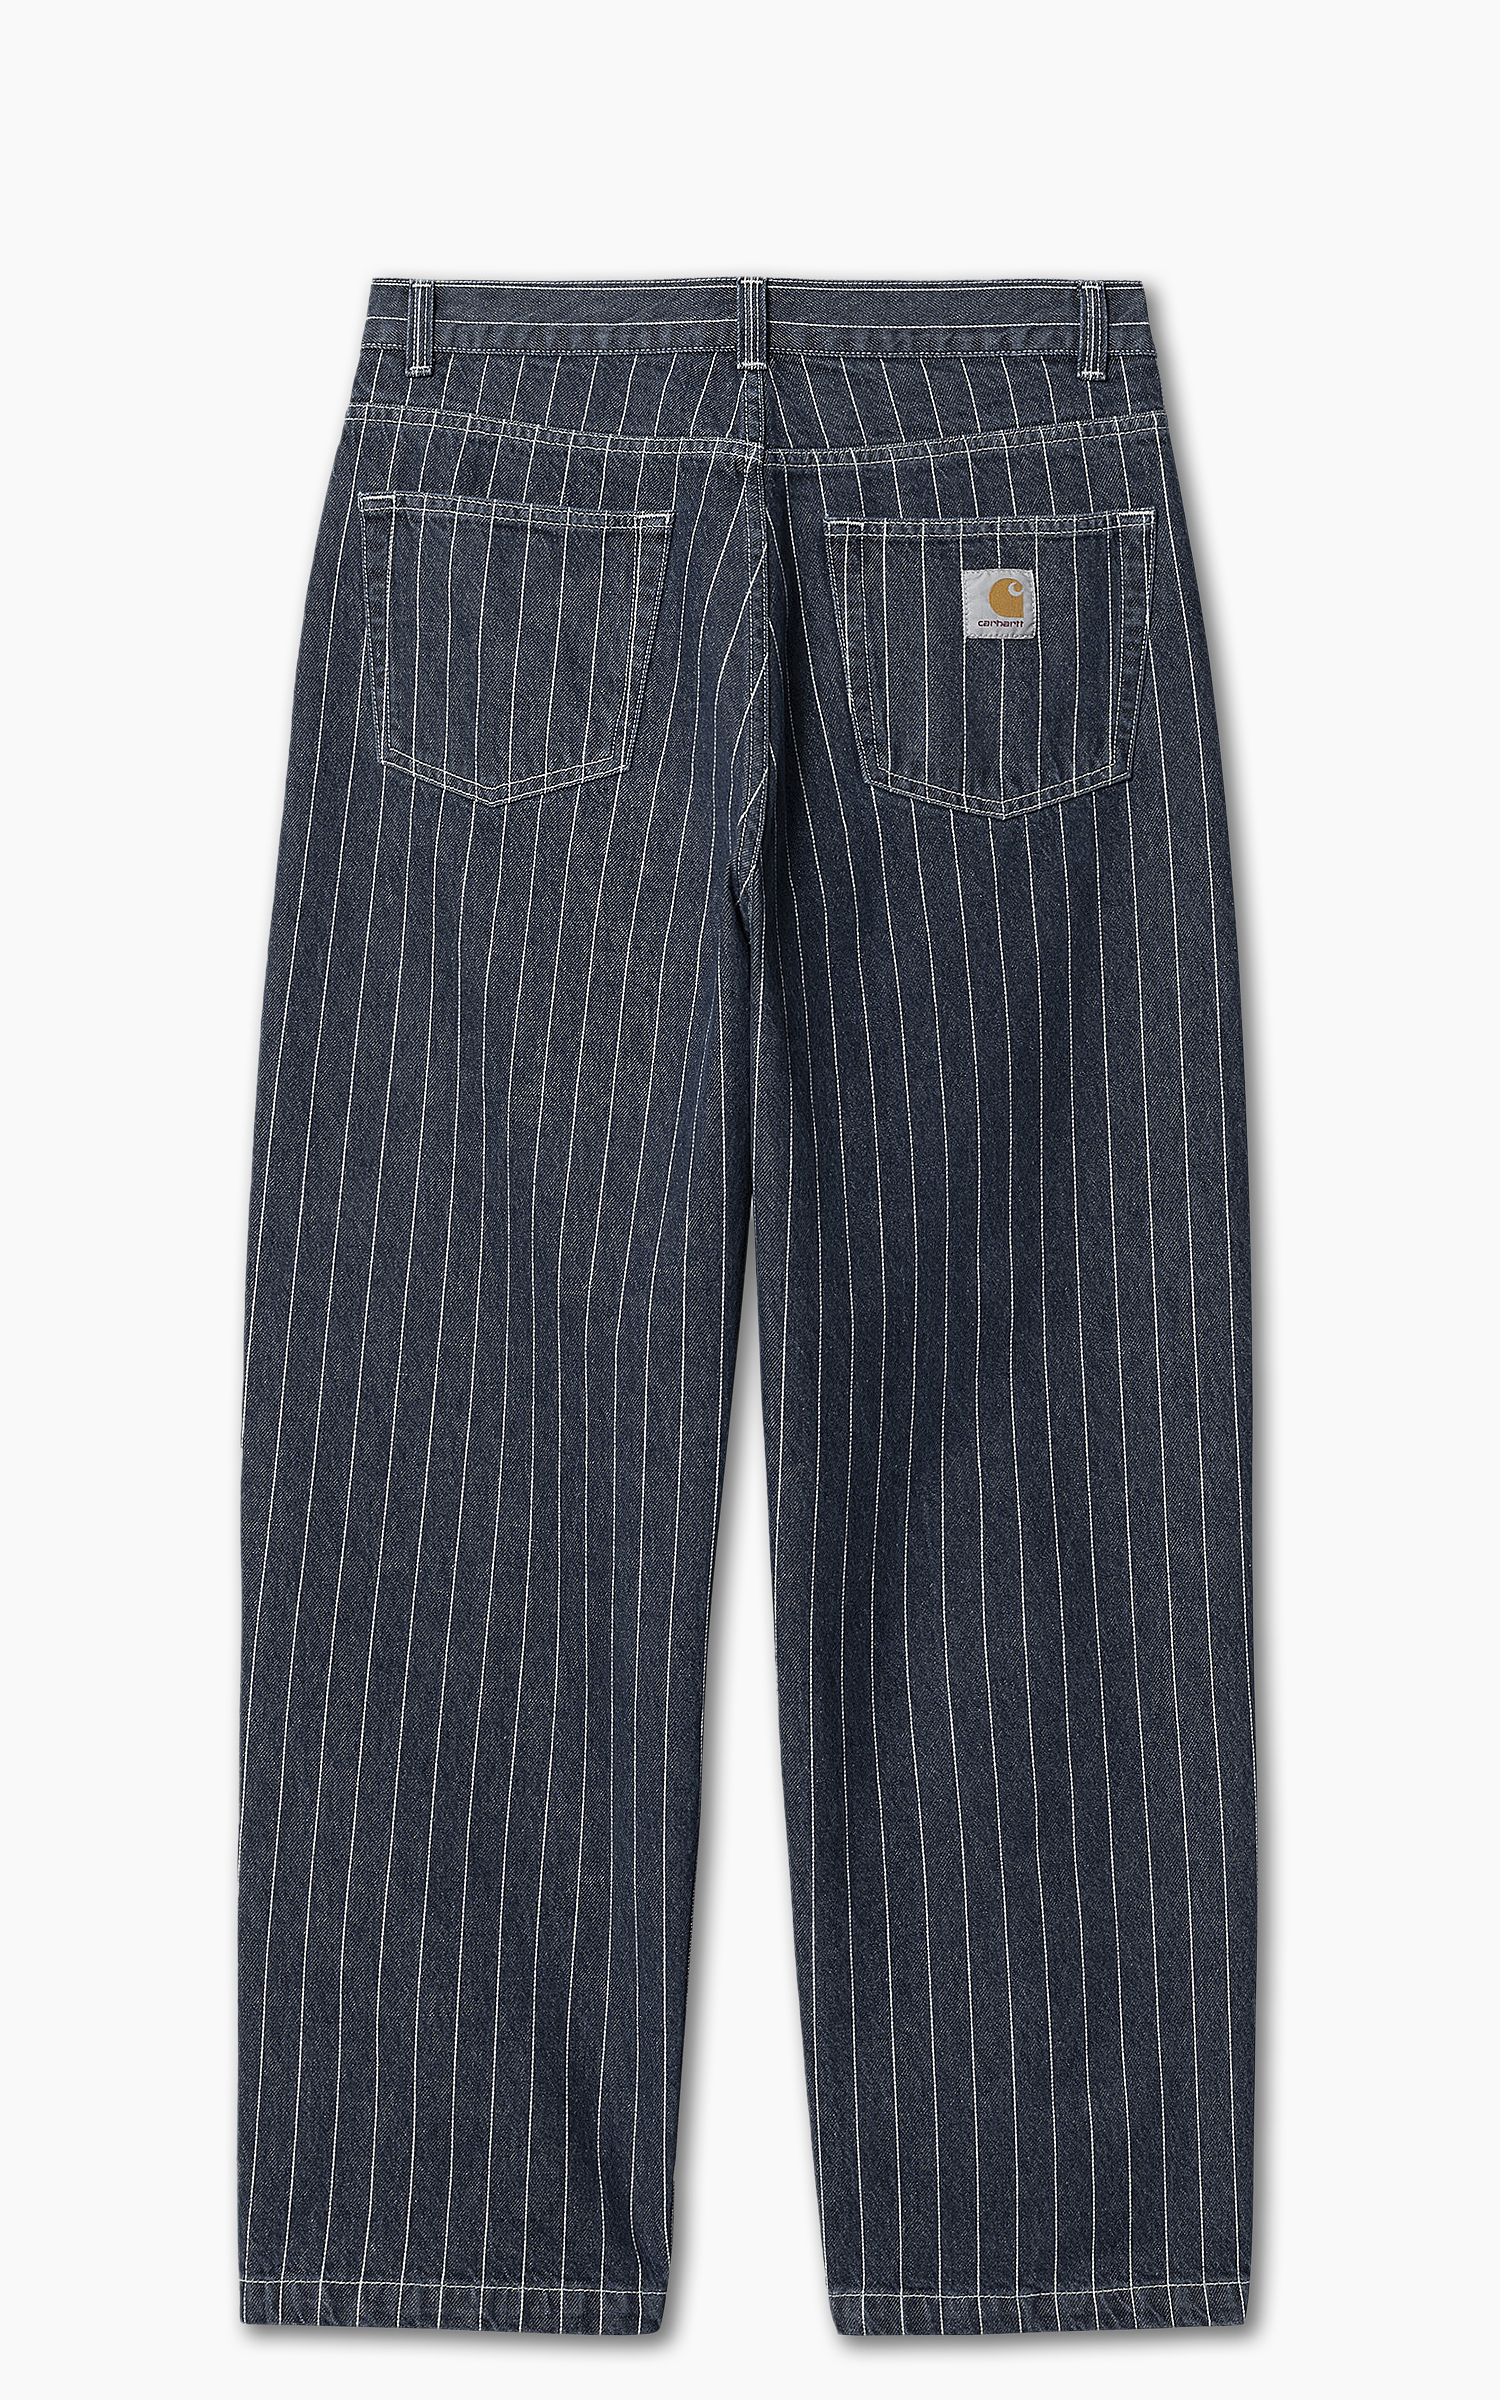 Carhartt WIP Orlean Pant Orlean Stripe Blue/White Stone Washed | Cultizm